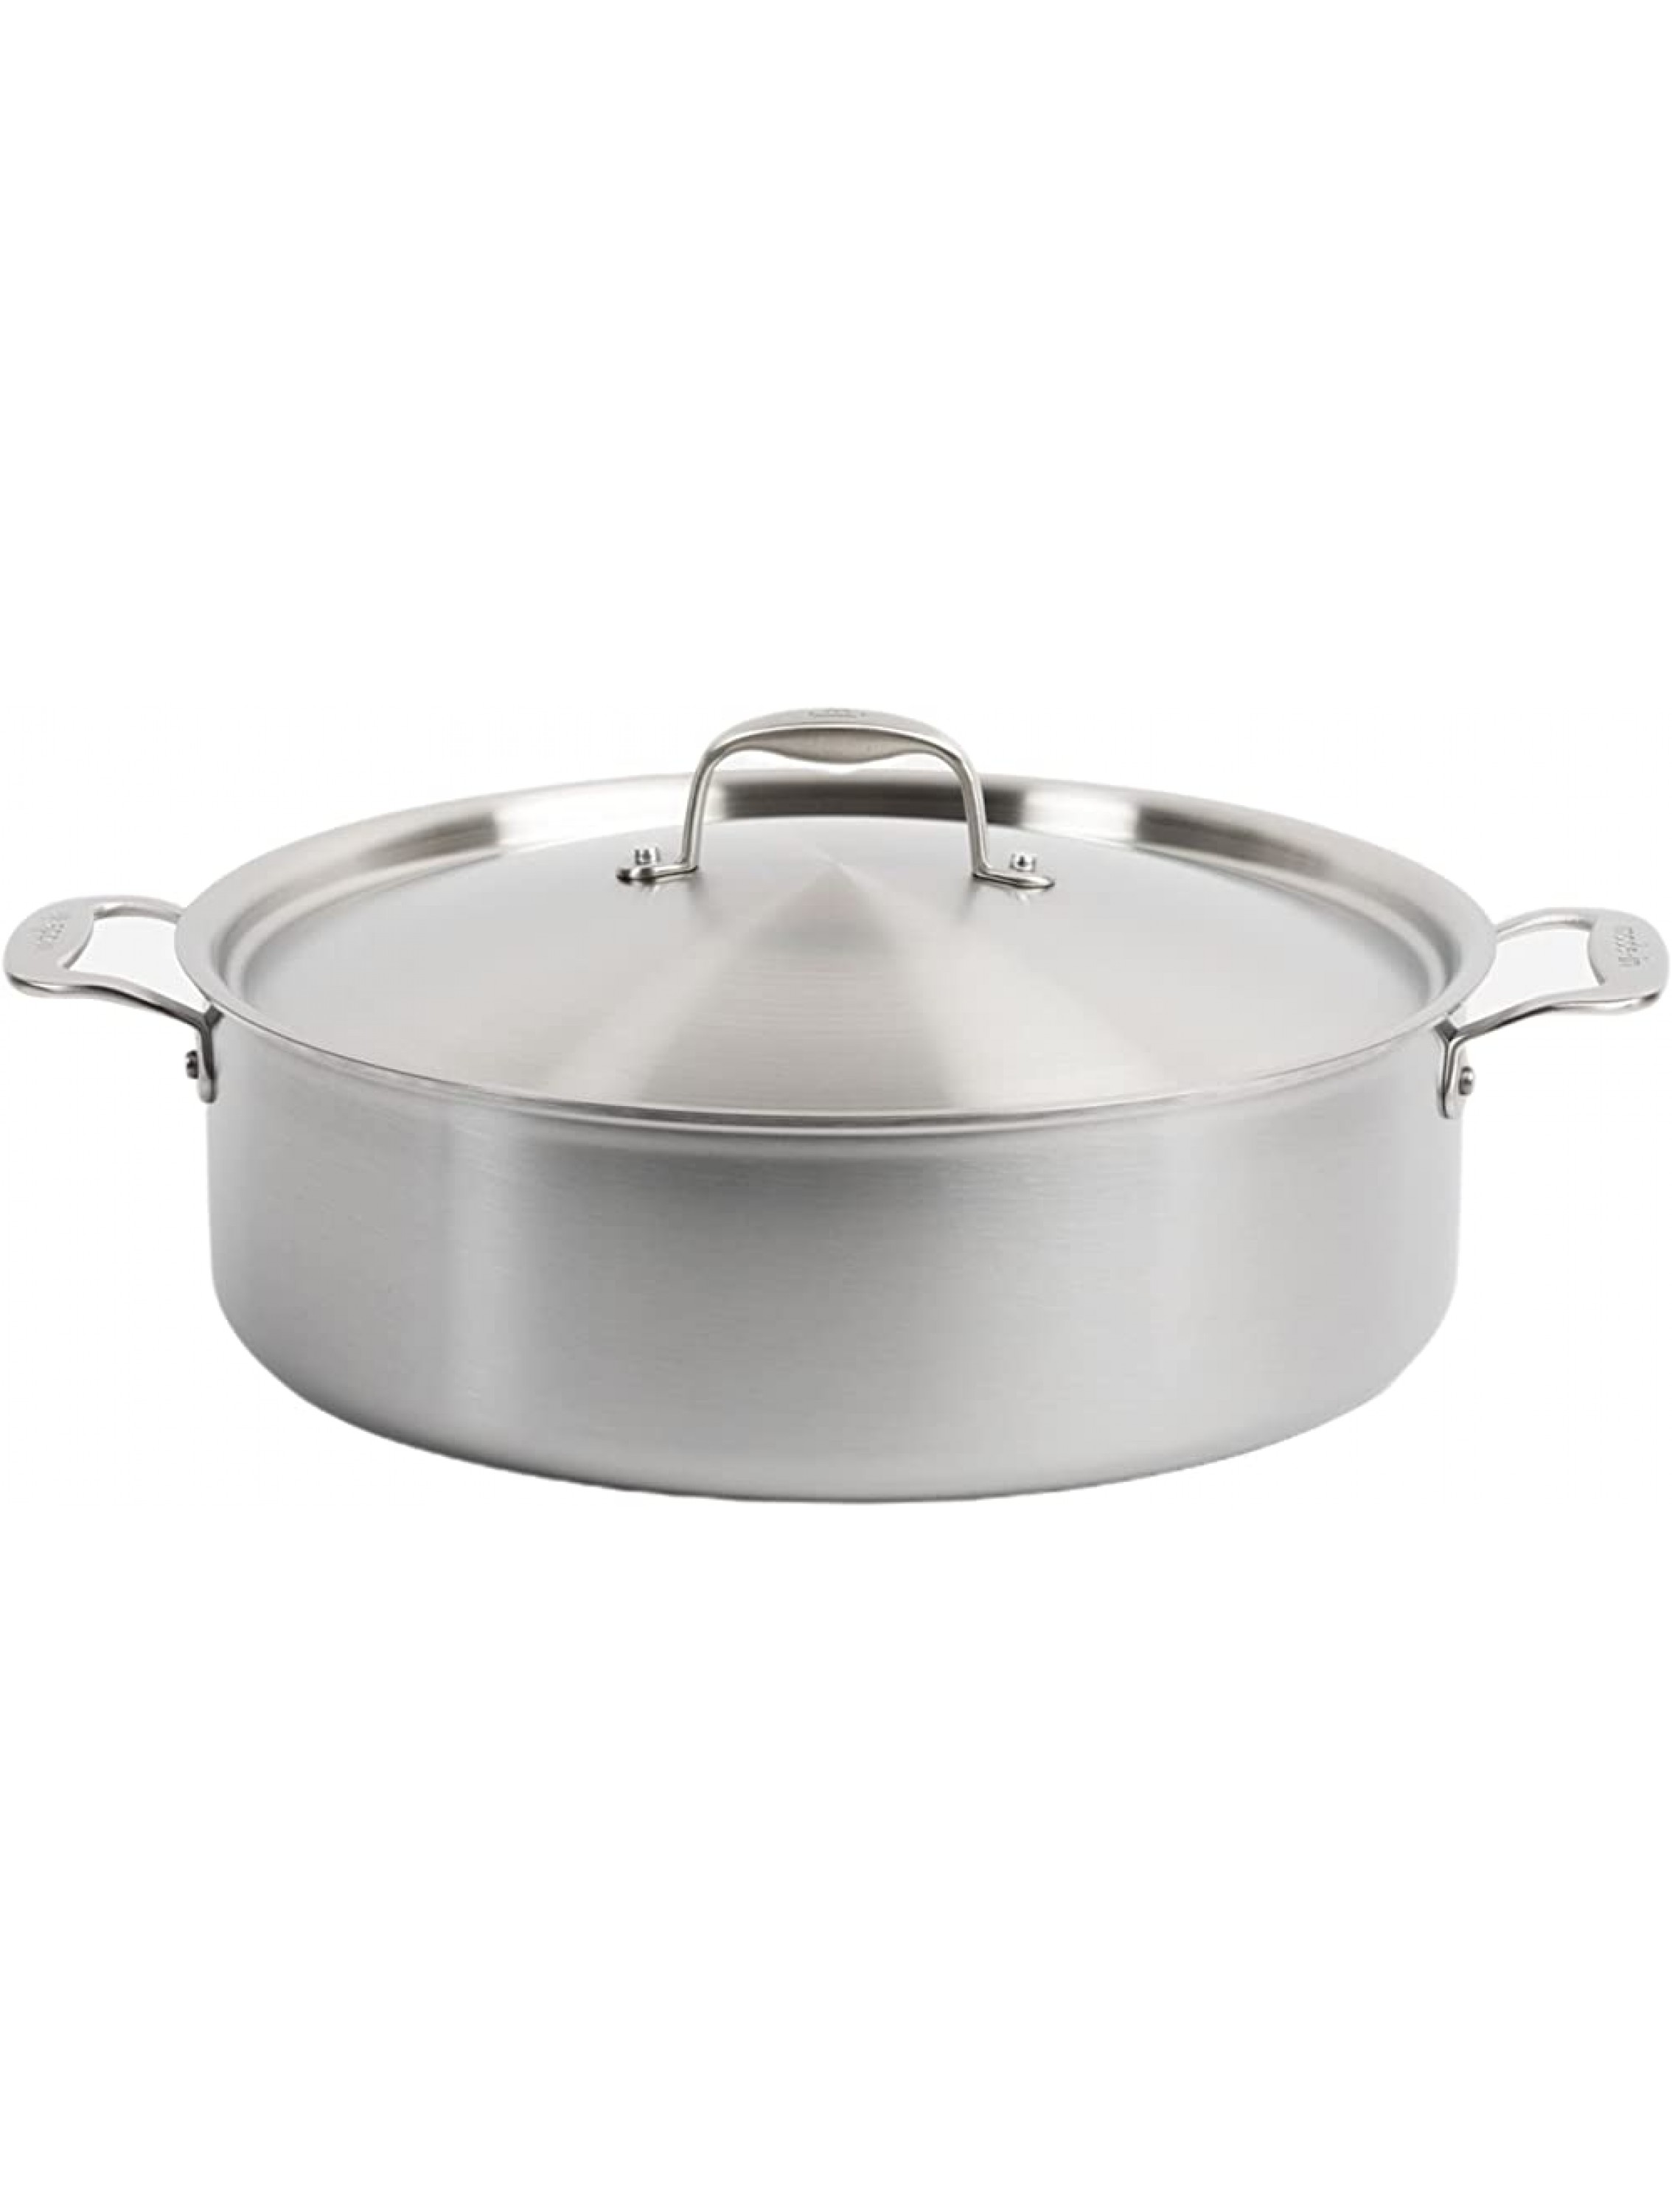 Made In Cookware 10 Quart Stainless Steel Rondeau Pot w Lid Stainless Clad 5 Ply Construction Induction Compatible Made in Italy Professional Cookware - BKTLFXDFA